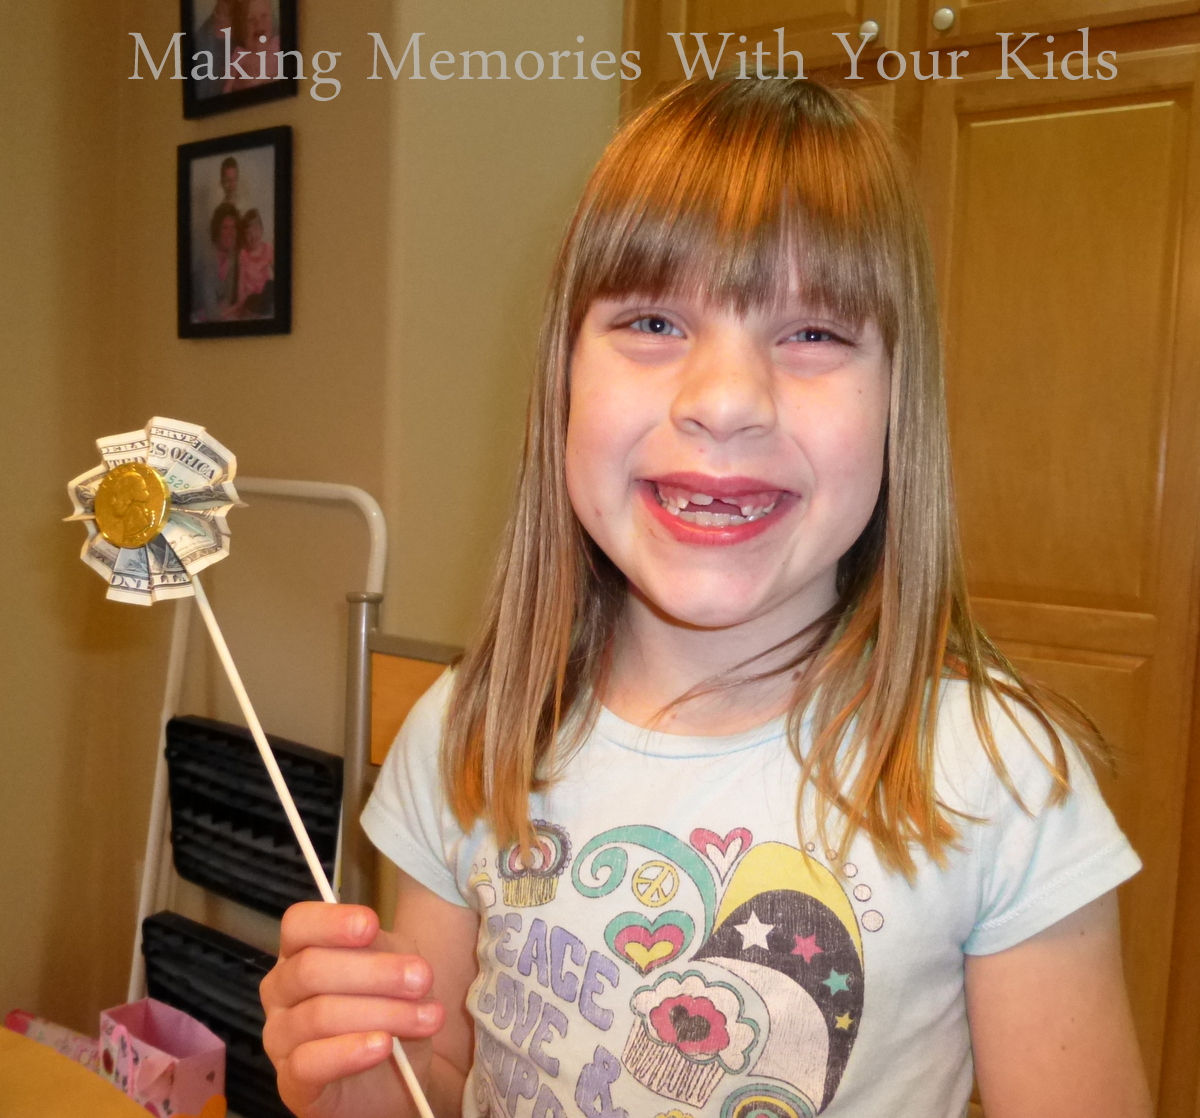 Money Bouquet - Making Memories With Your Kids